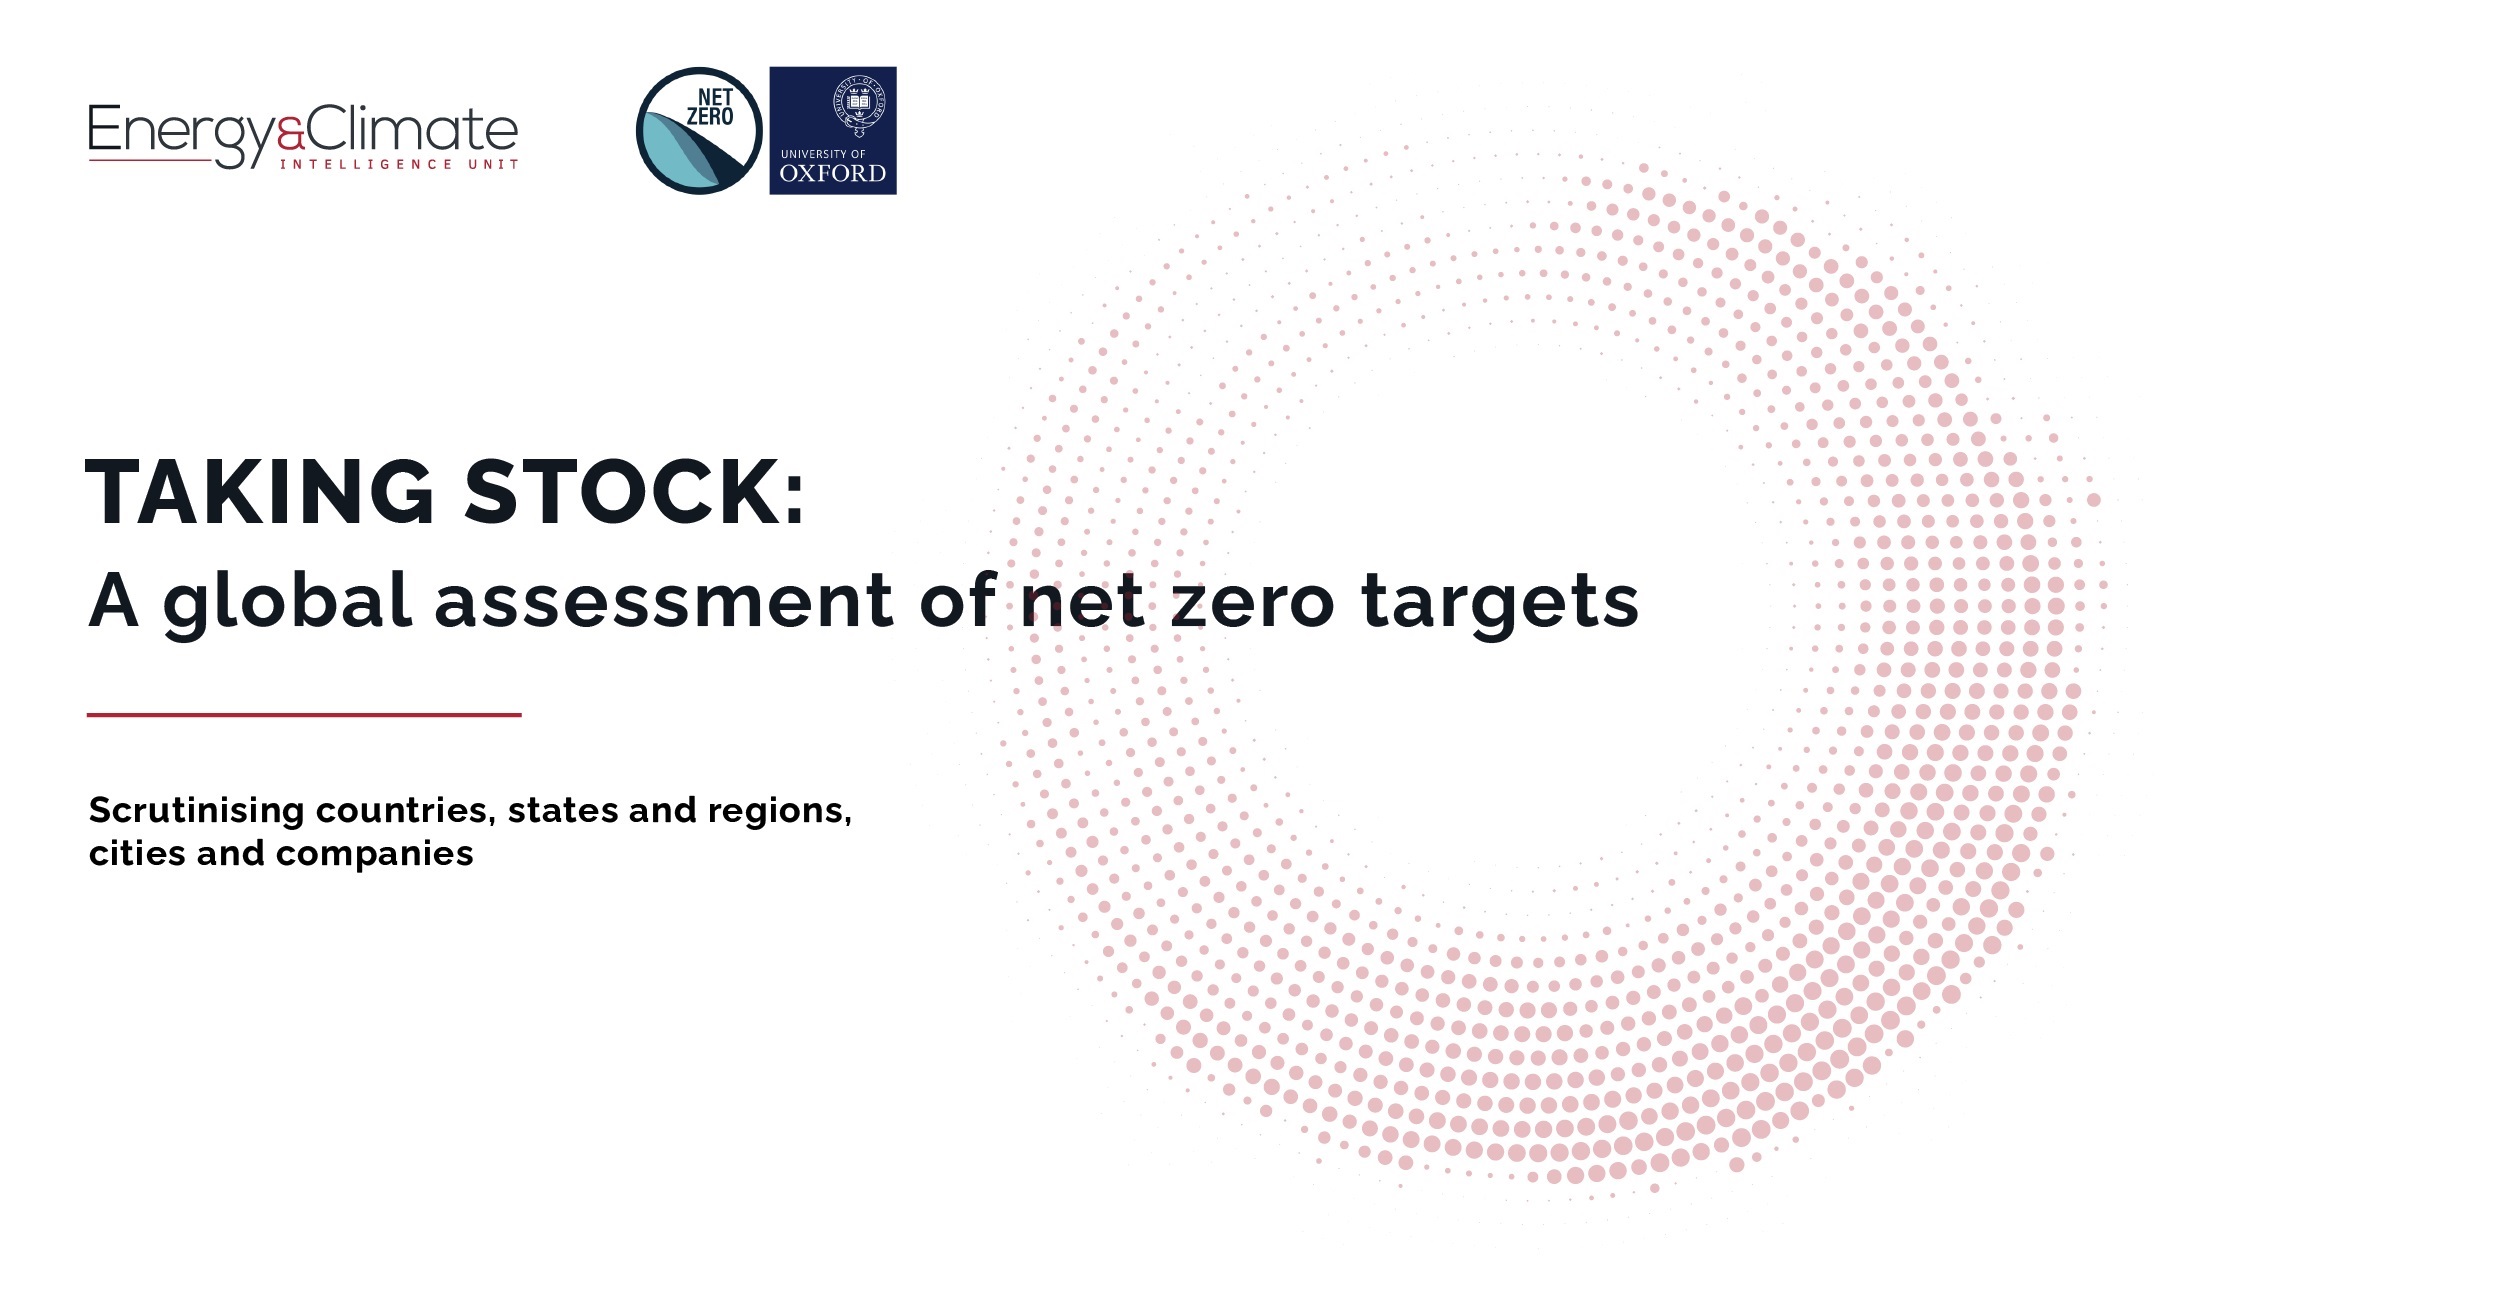 According to the report, it presents an ‘opening snapshot’ of the current state of net zero commitments